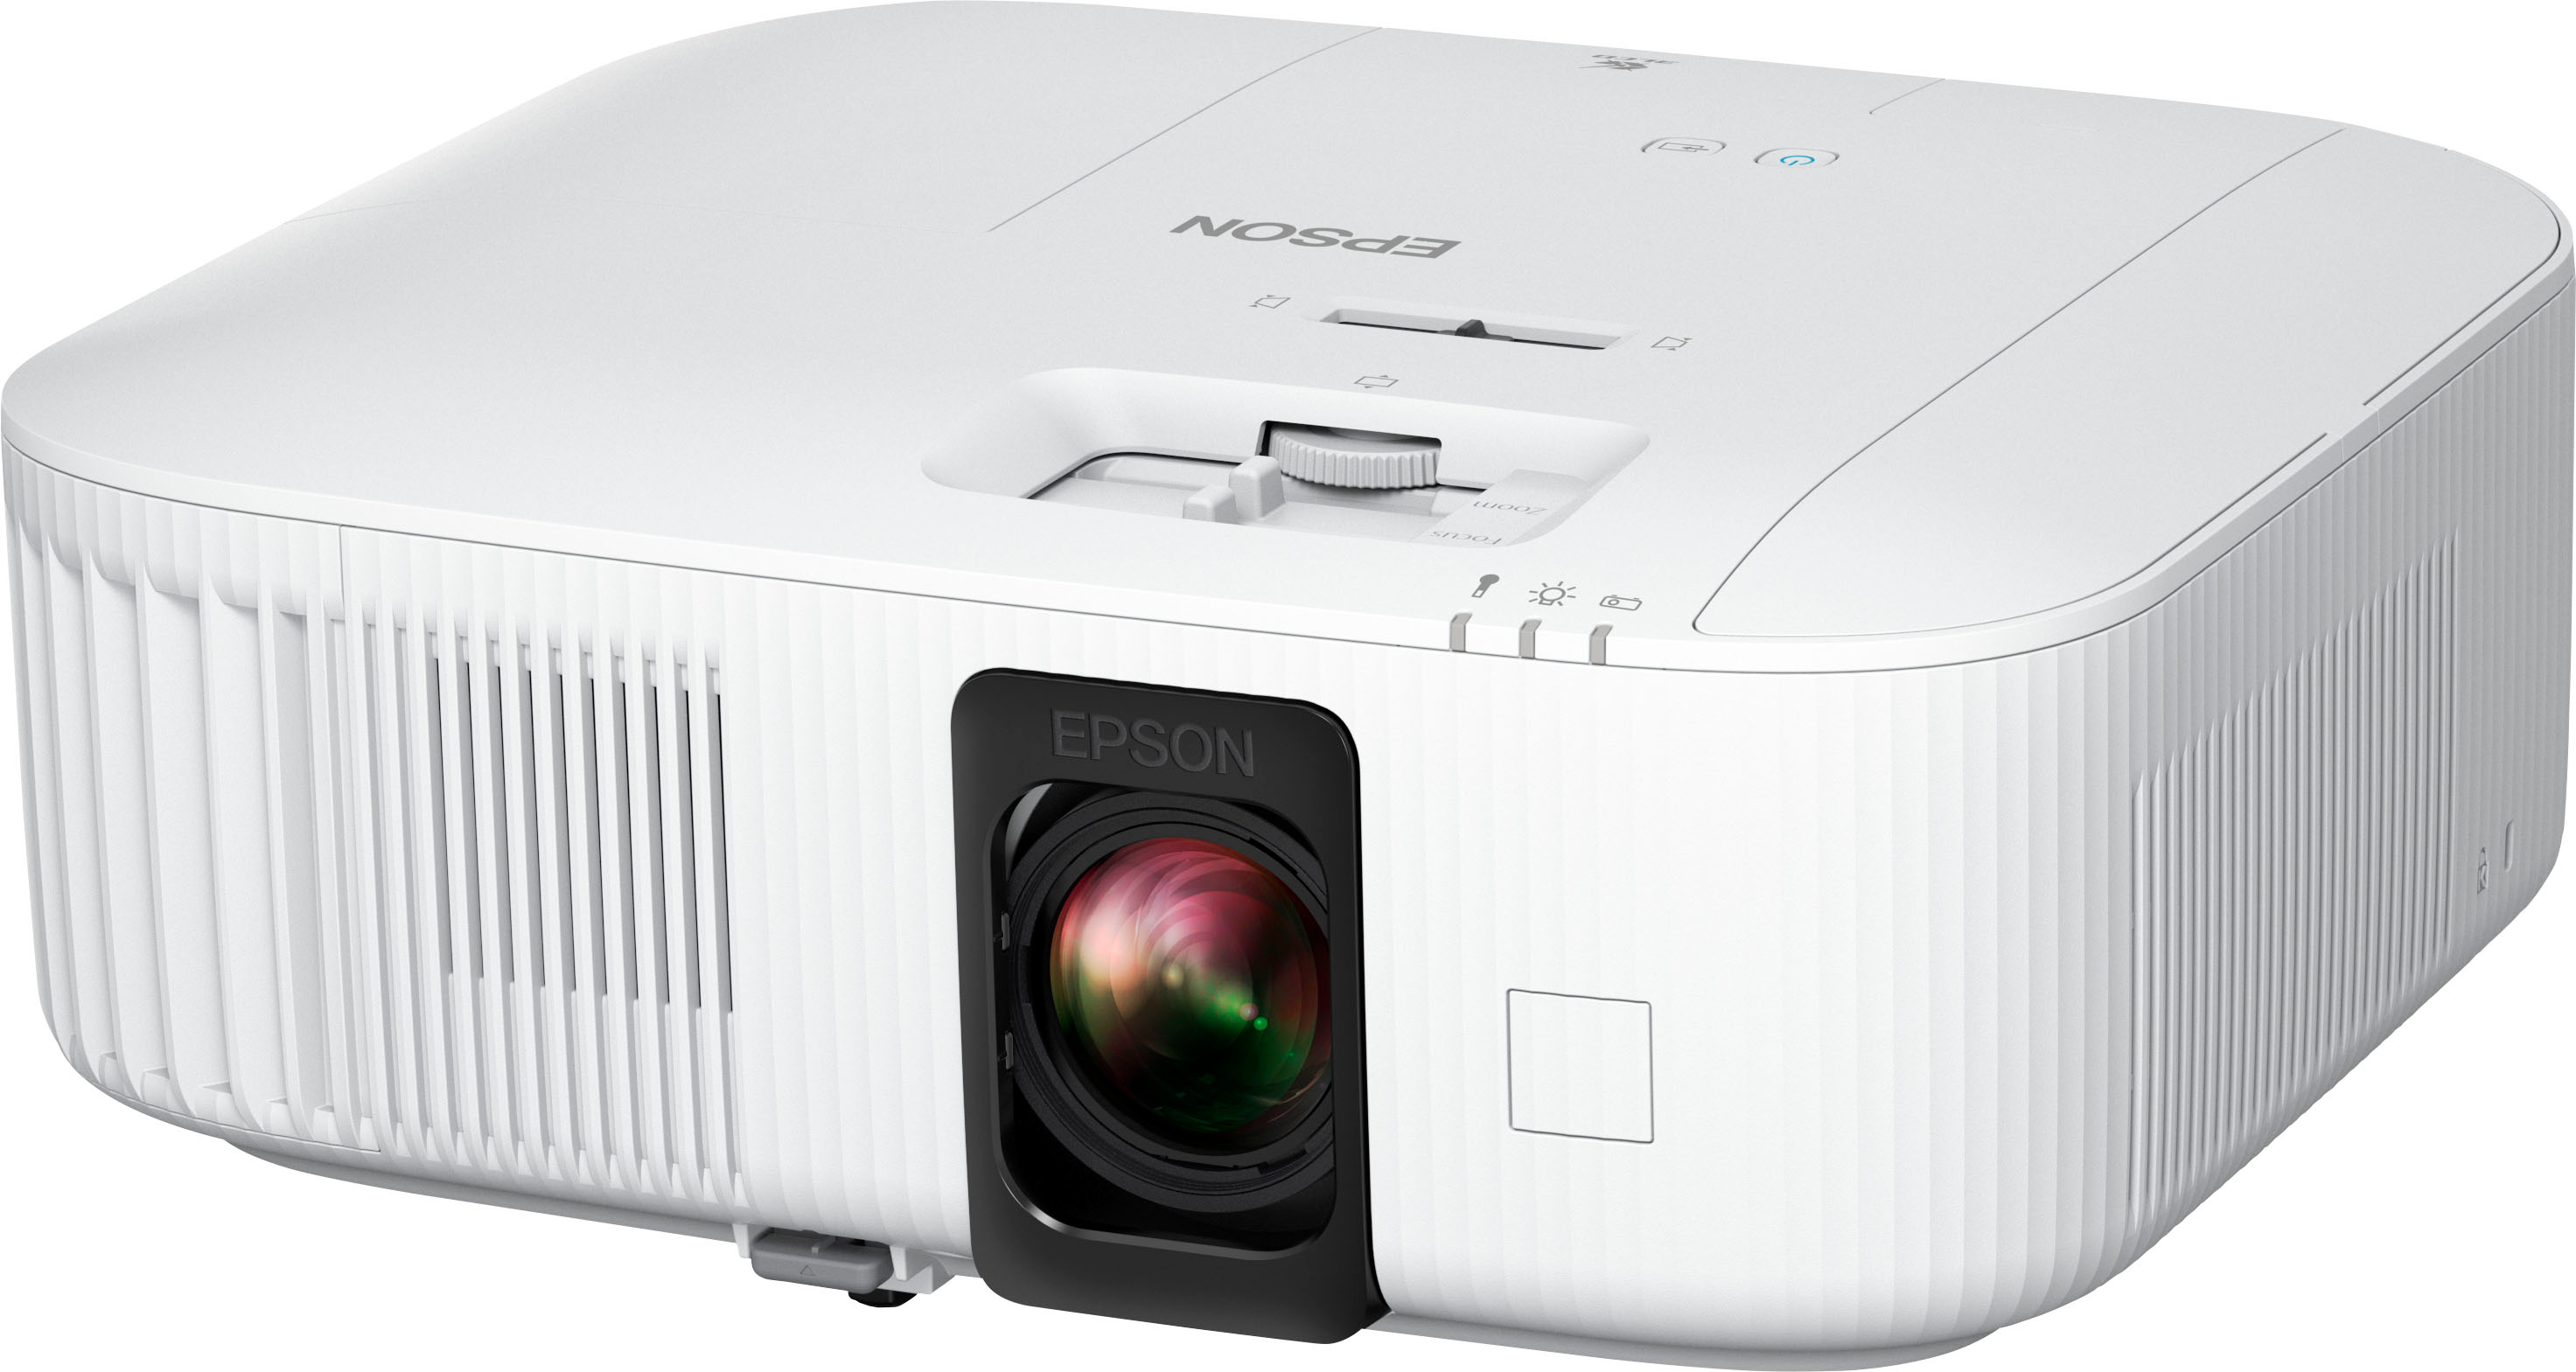 Left View: Epson - Pro EX9240 3LCD Full HD 1080p Wireless Projector with Miracast - Black